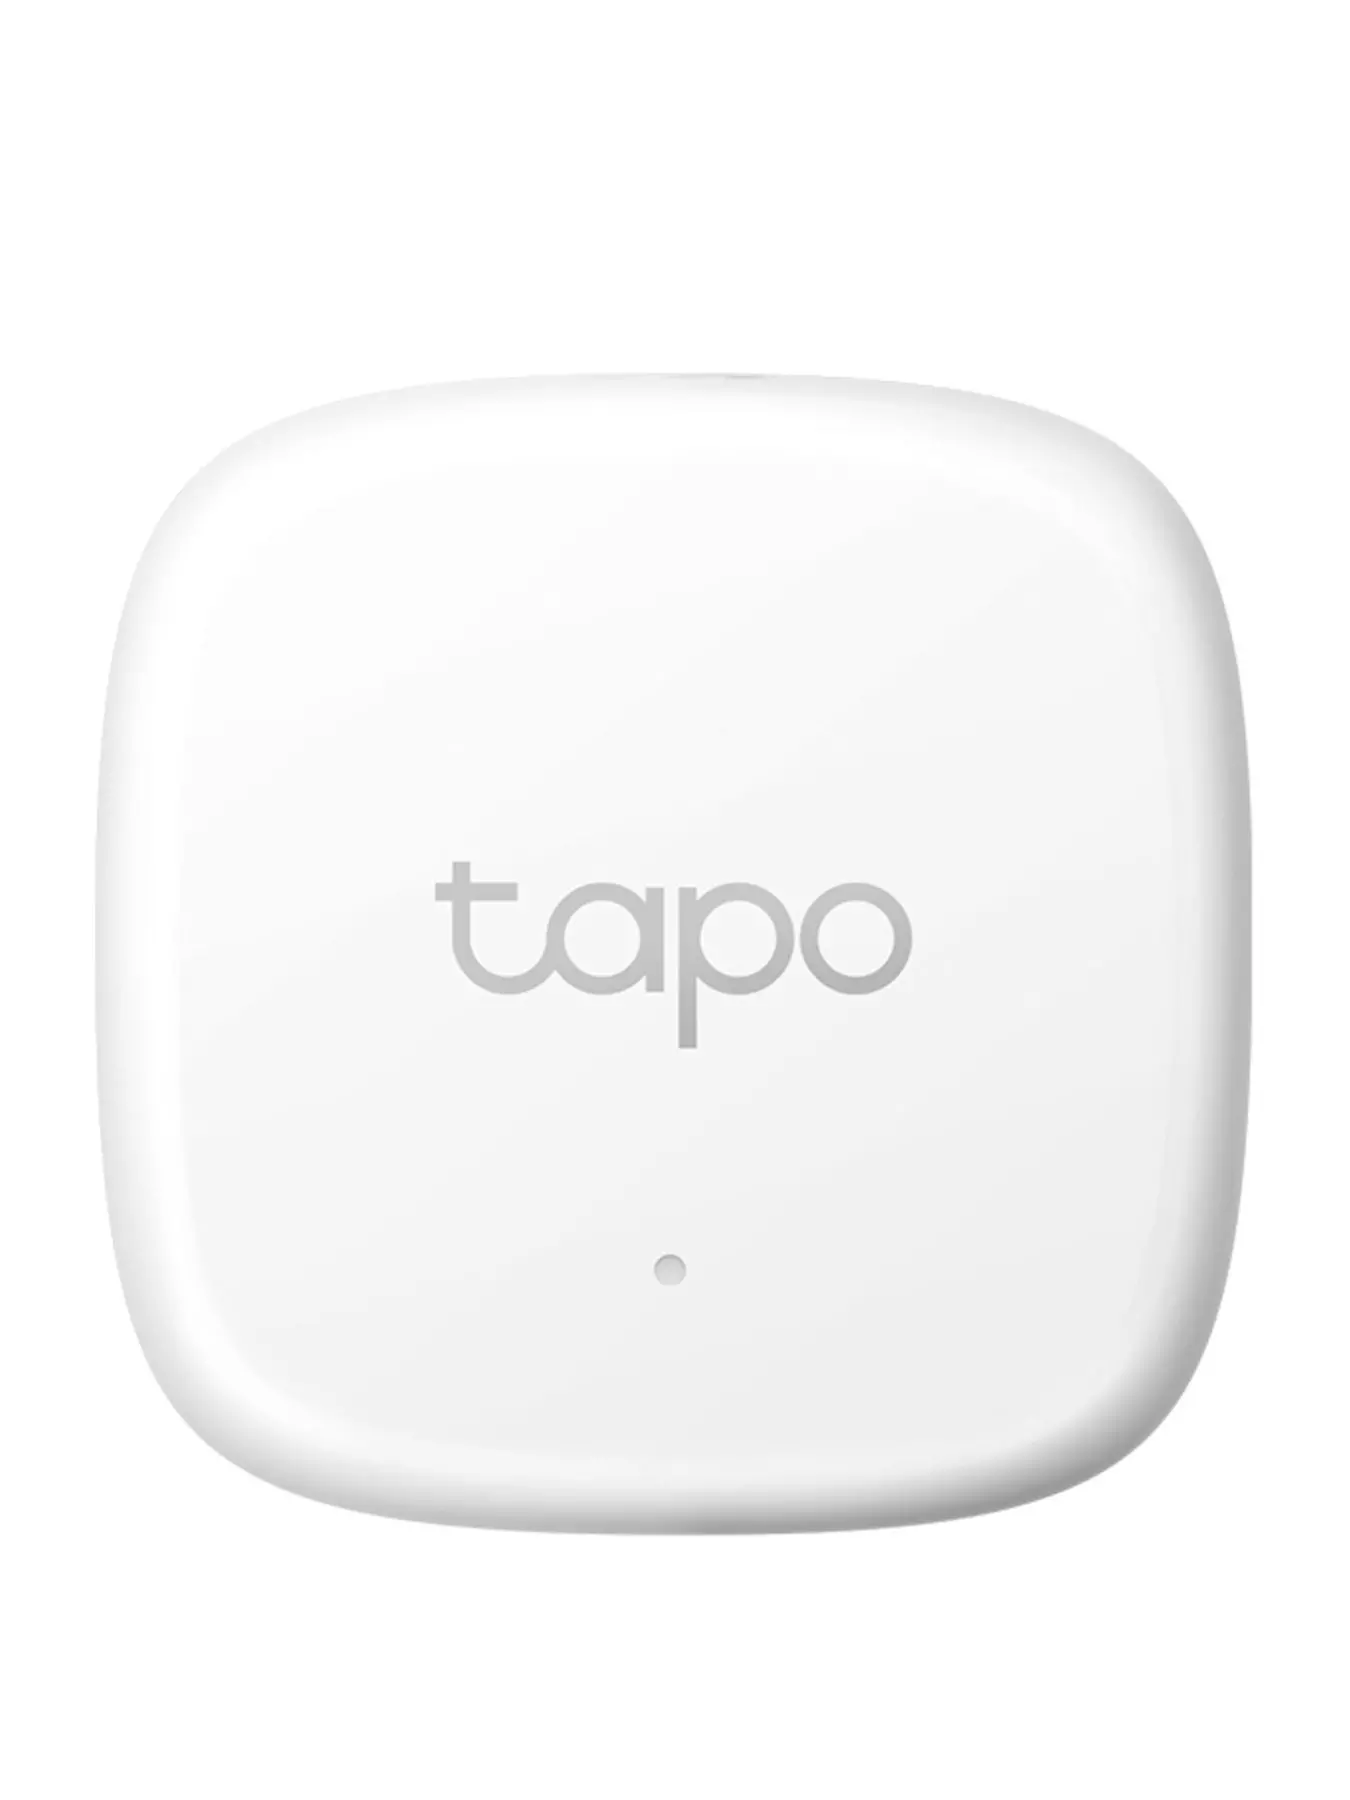 How to Setup Tapo T310 Smart Temperature and Humidity Sensor 